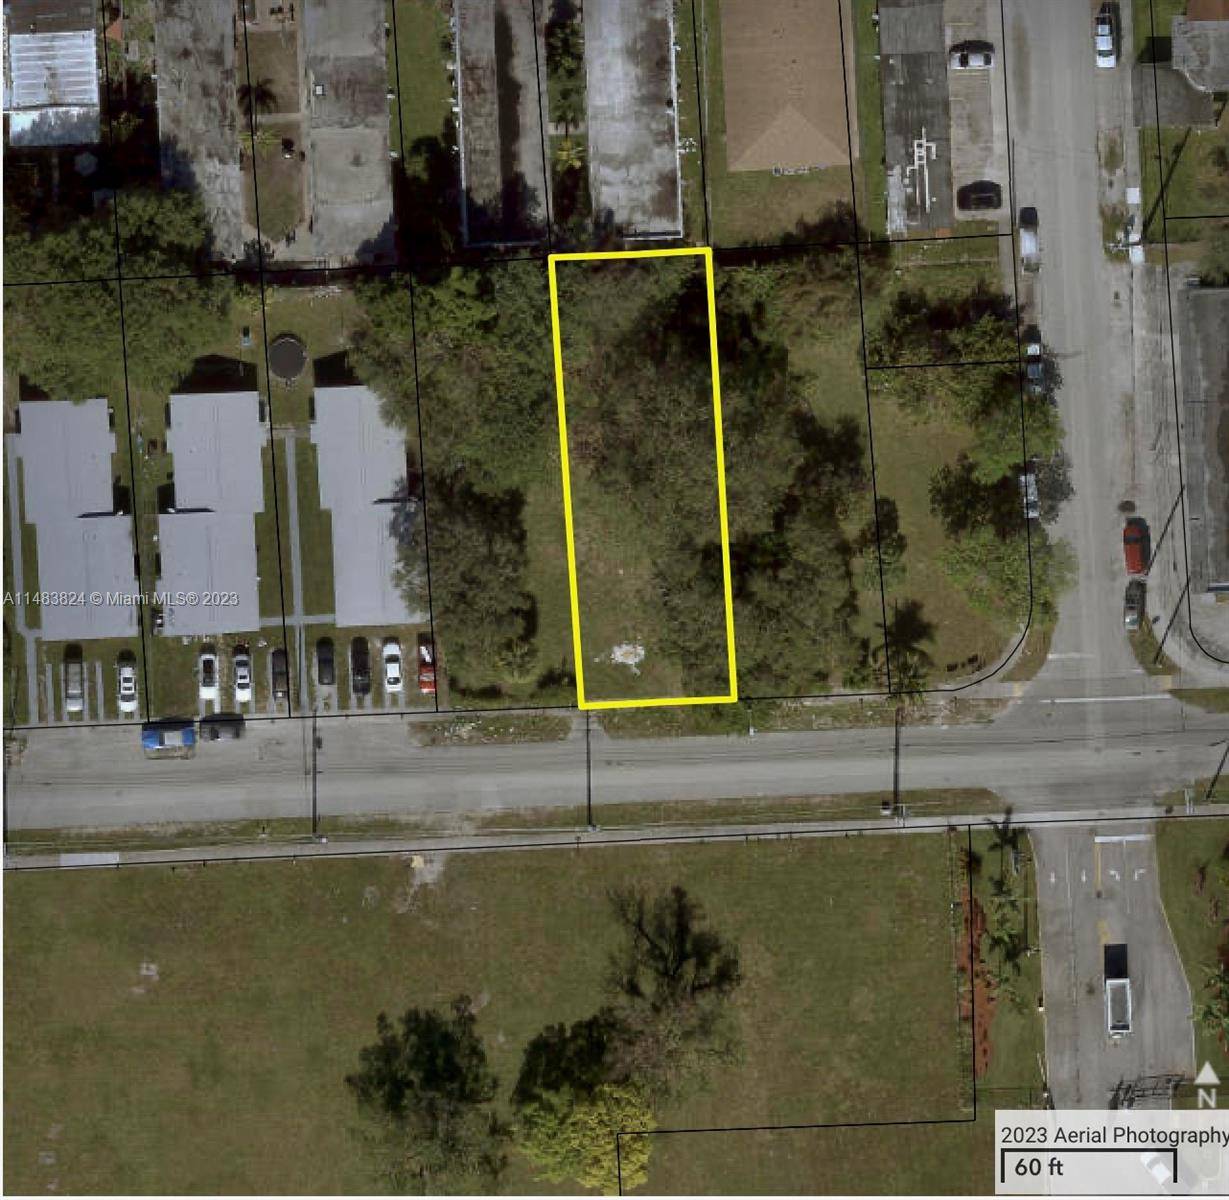 LAND FOR SALE ! ! ! ! ! Minutes away from the design district, Wynwood, and Edgewater.